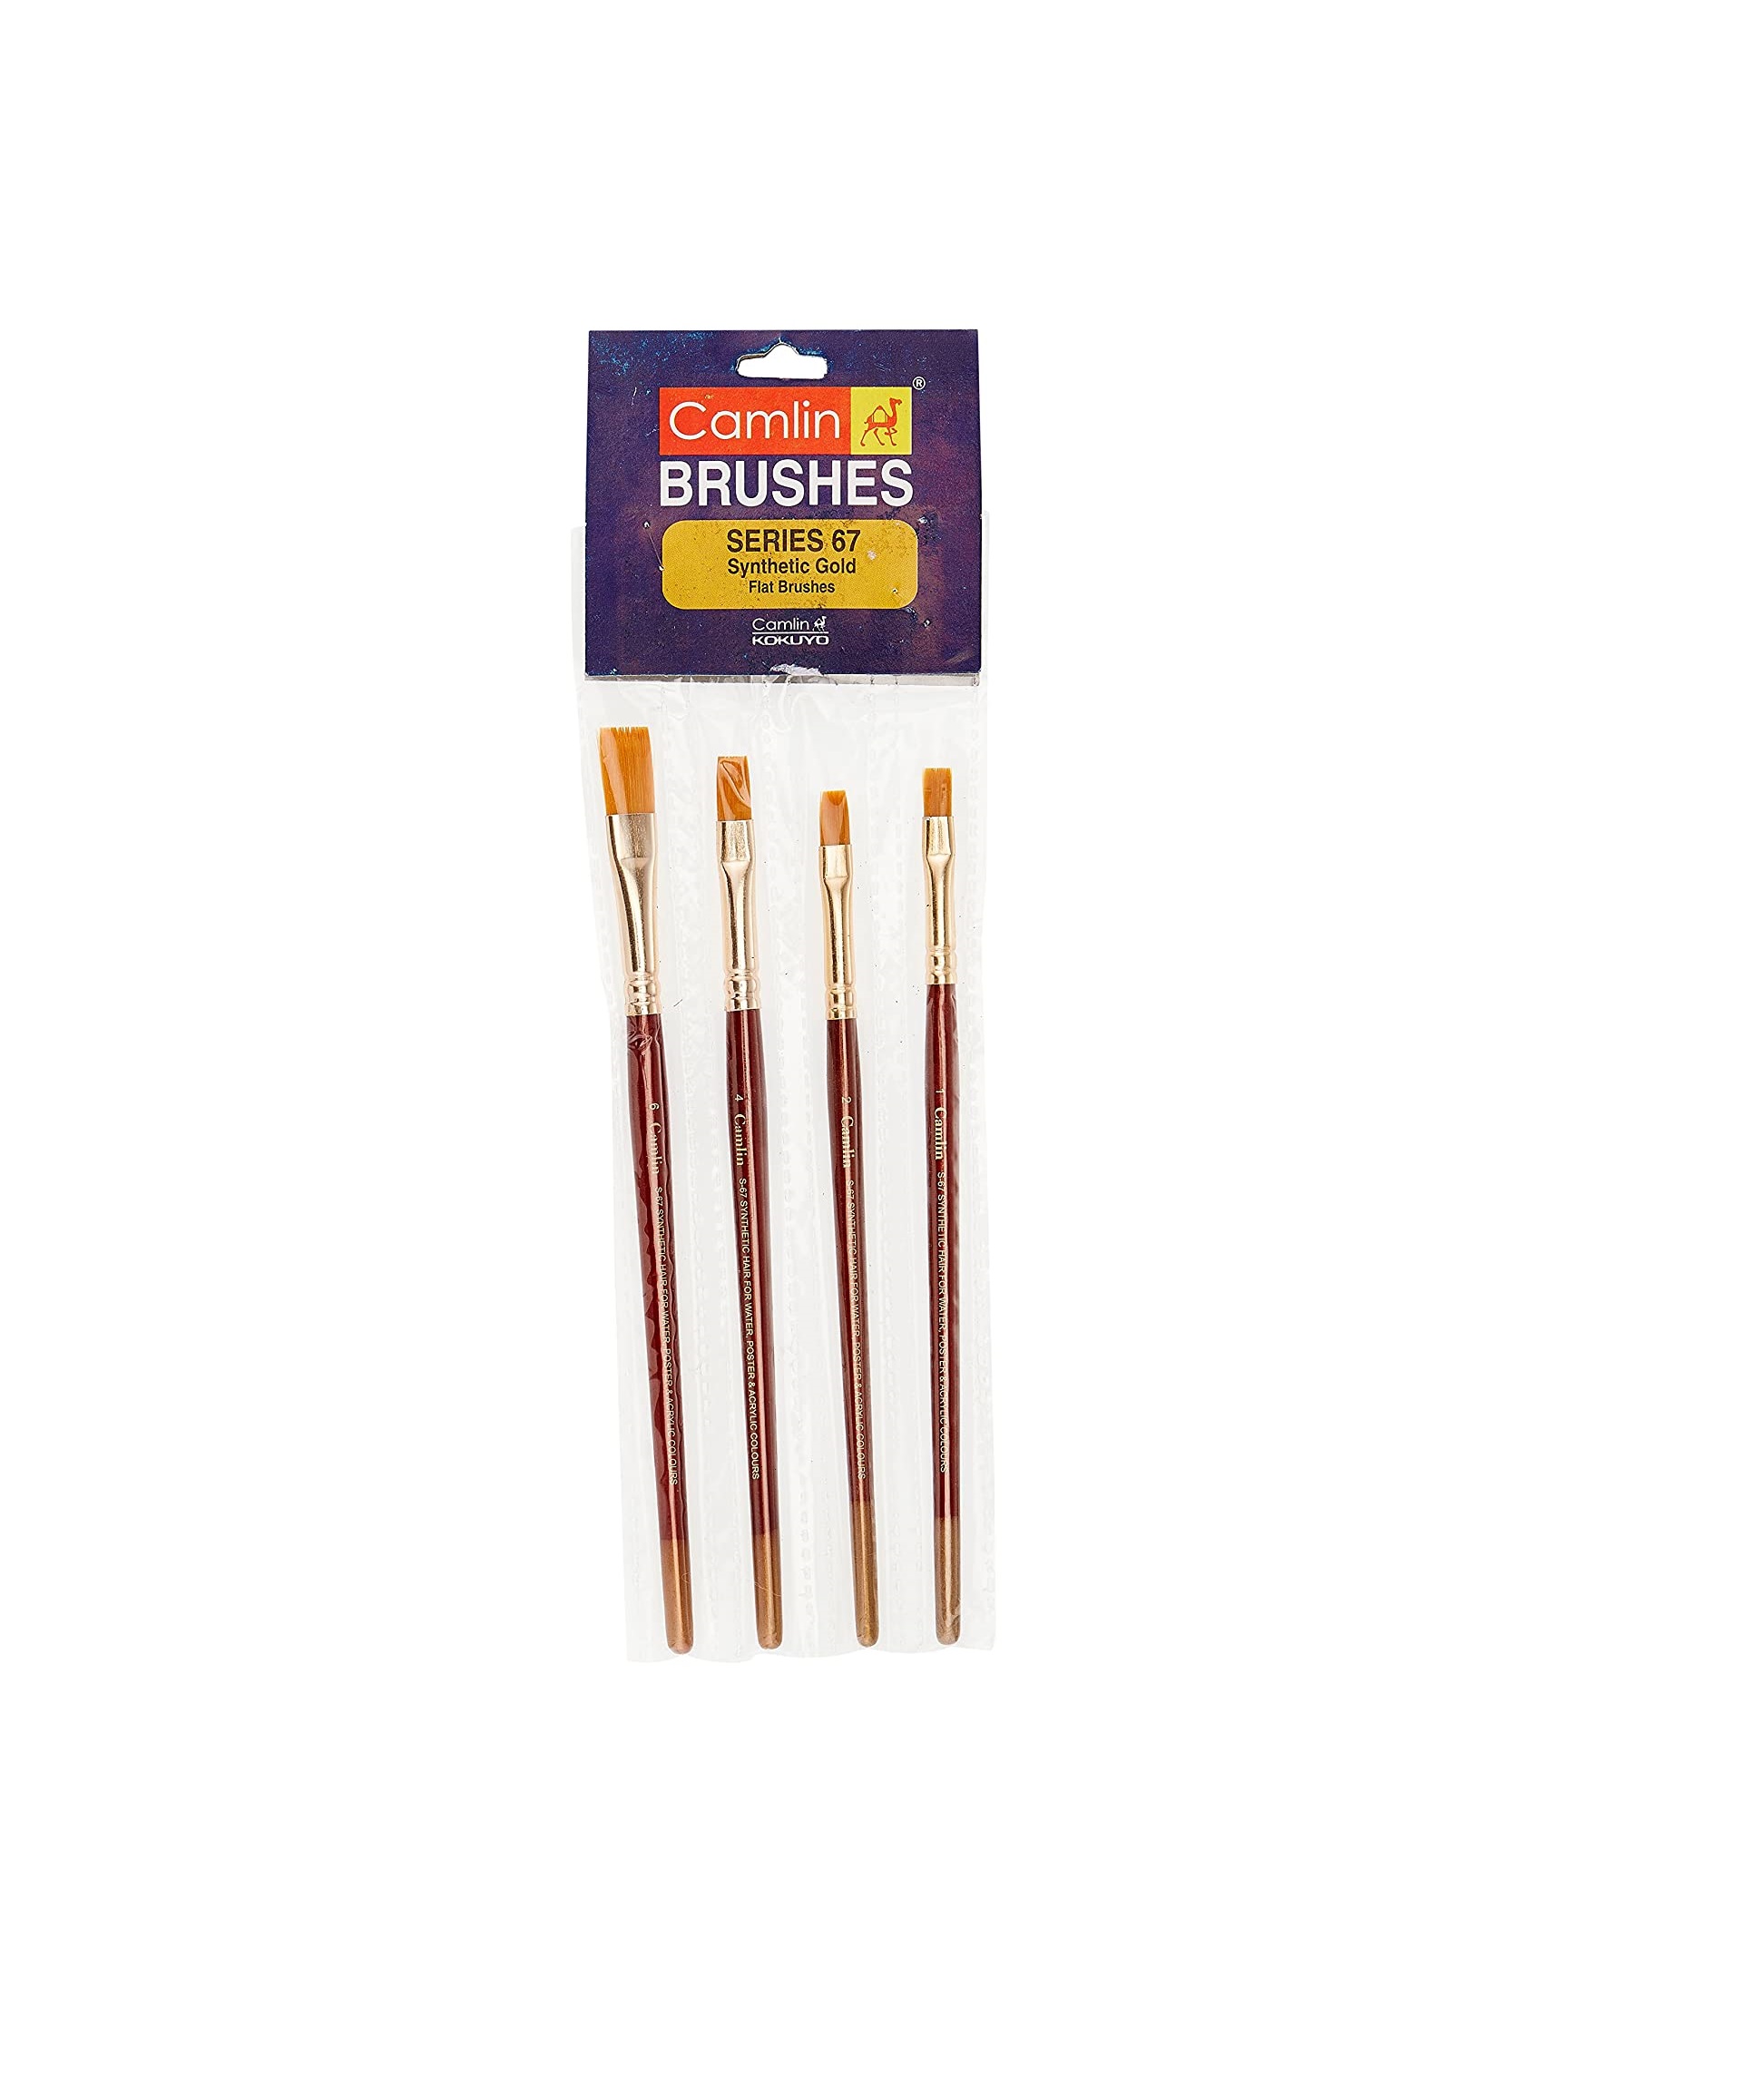 Camel Paint Brush Series 67 - Flat Synthetic Gold, Set of 4